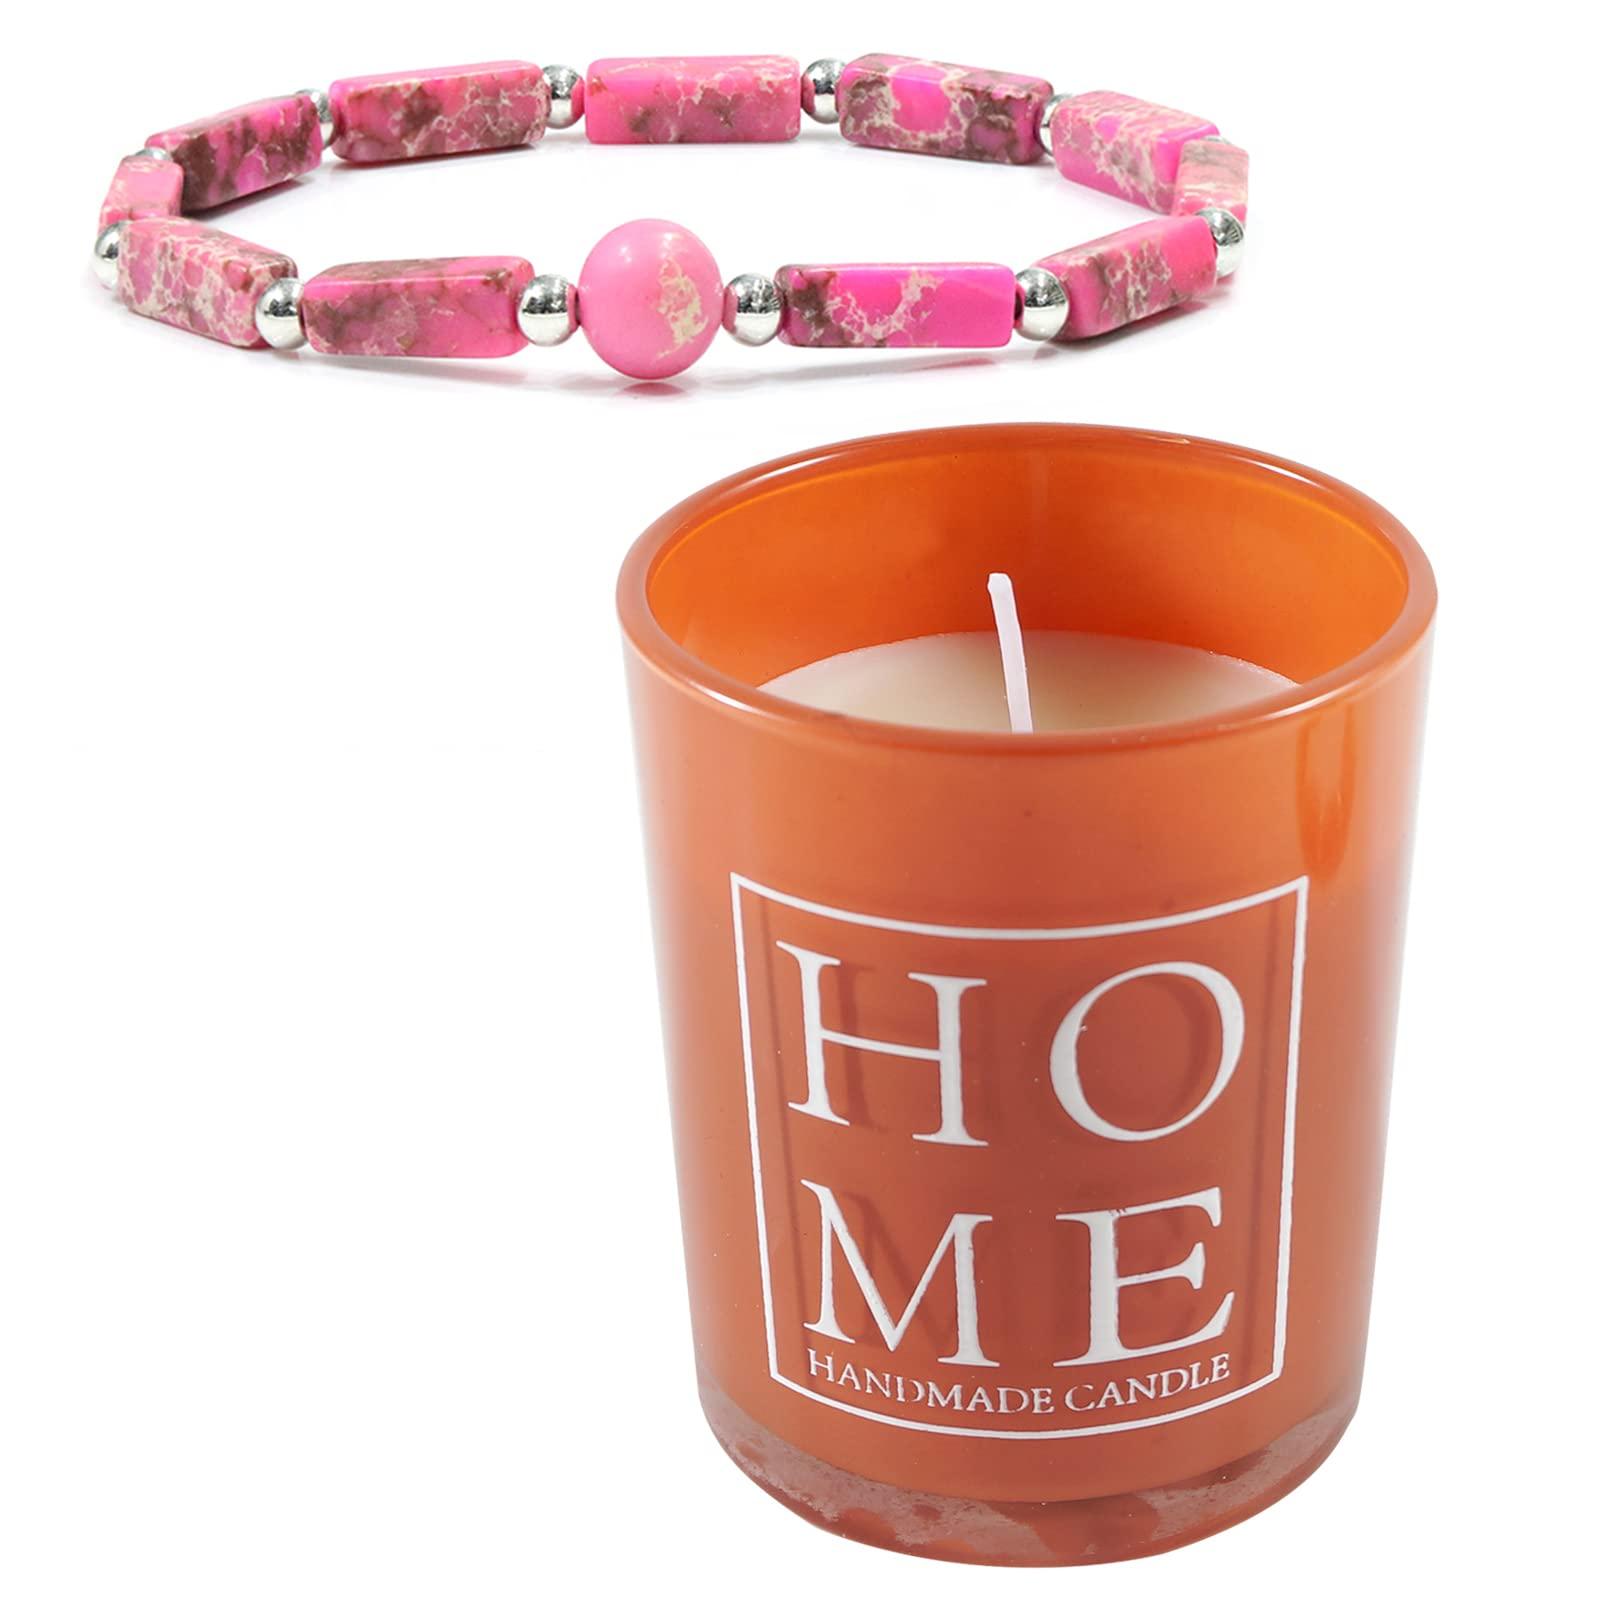 Soulnioi Scented Candle Soy Candle Aromatherapy Candle with 35 Hours Burn Time (Grapefruit & Oolong Tea Scent), and 1pc Natural Crystal Bracelet Rectangle Beaded Bracelet (Pink)